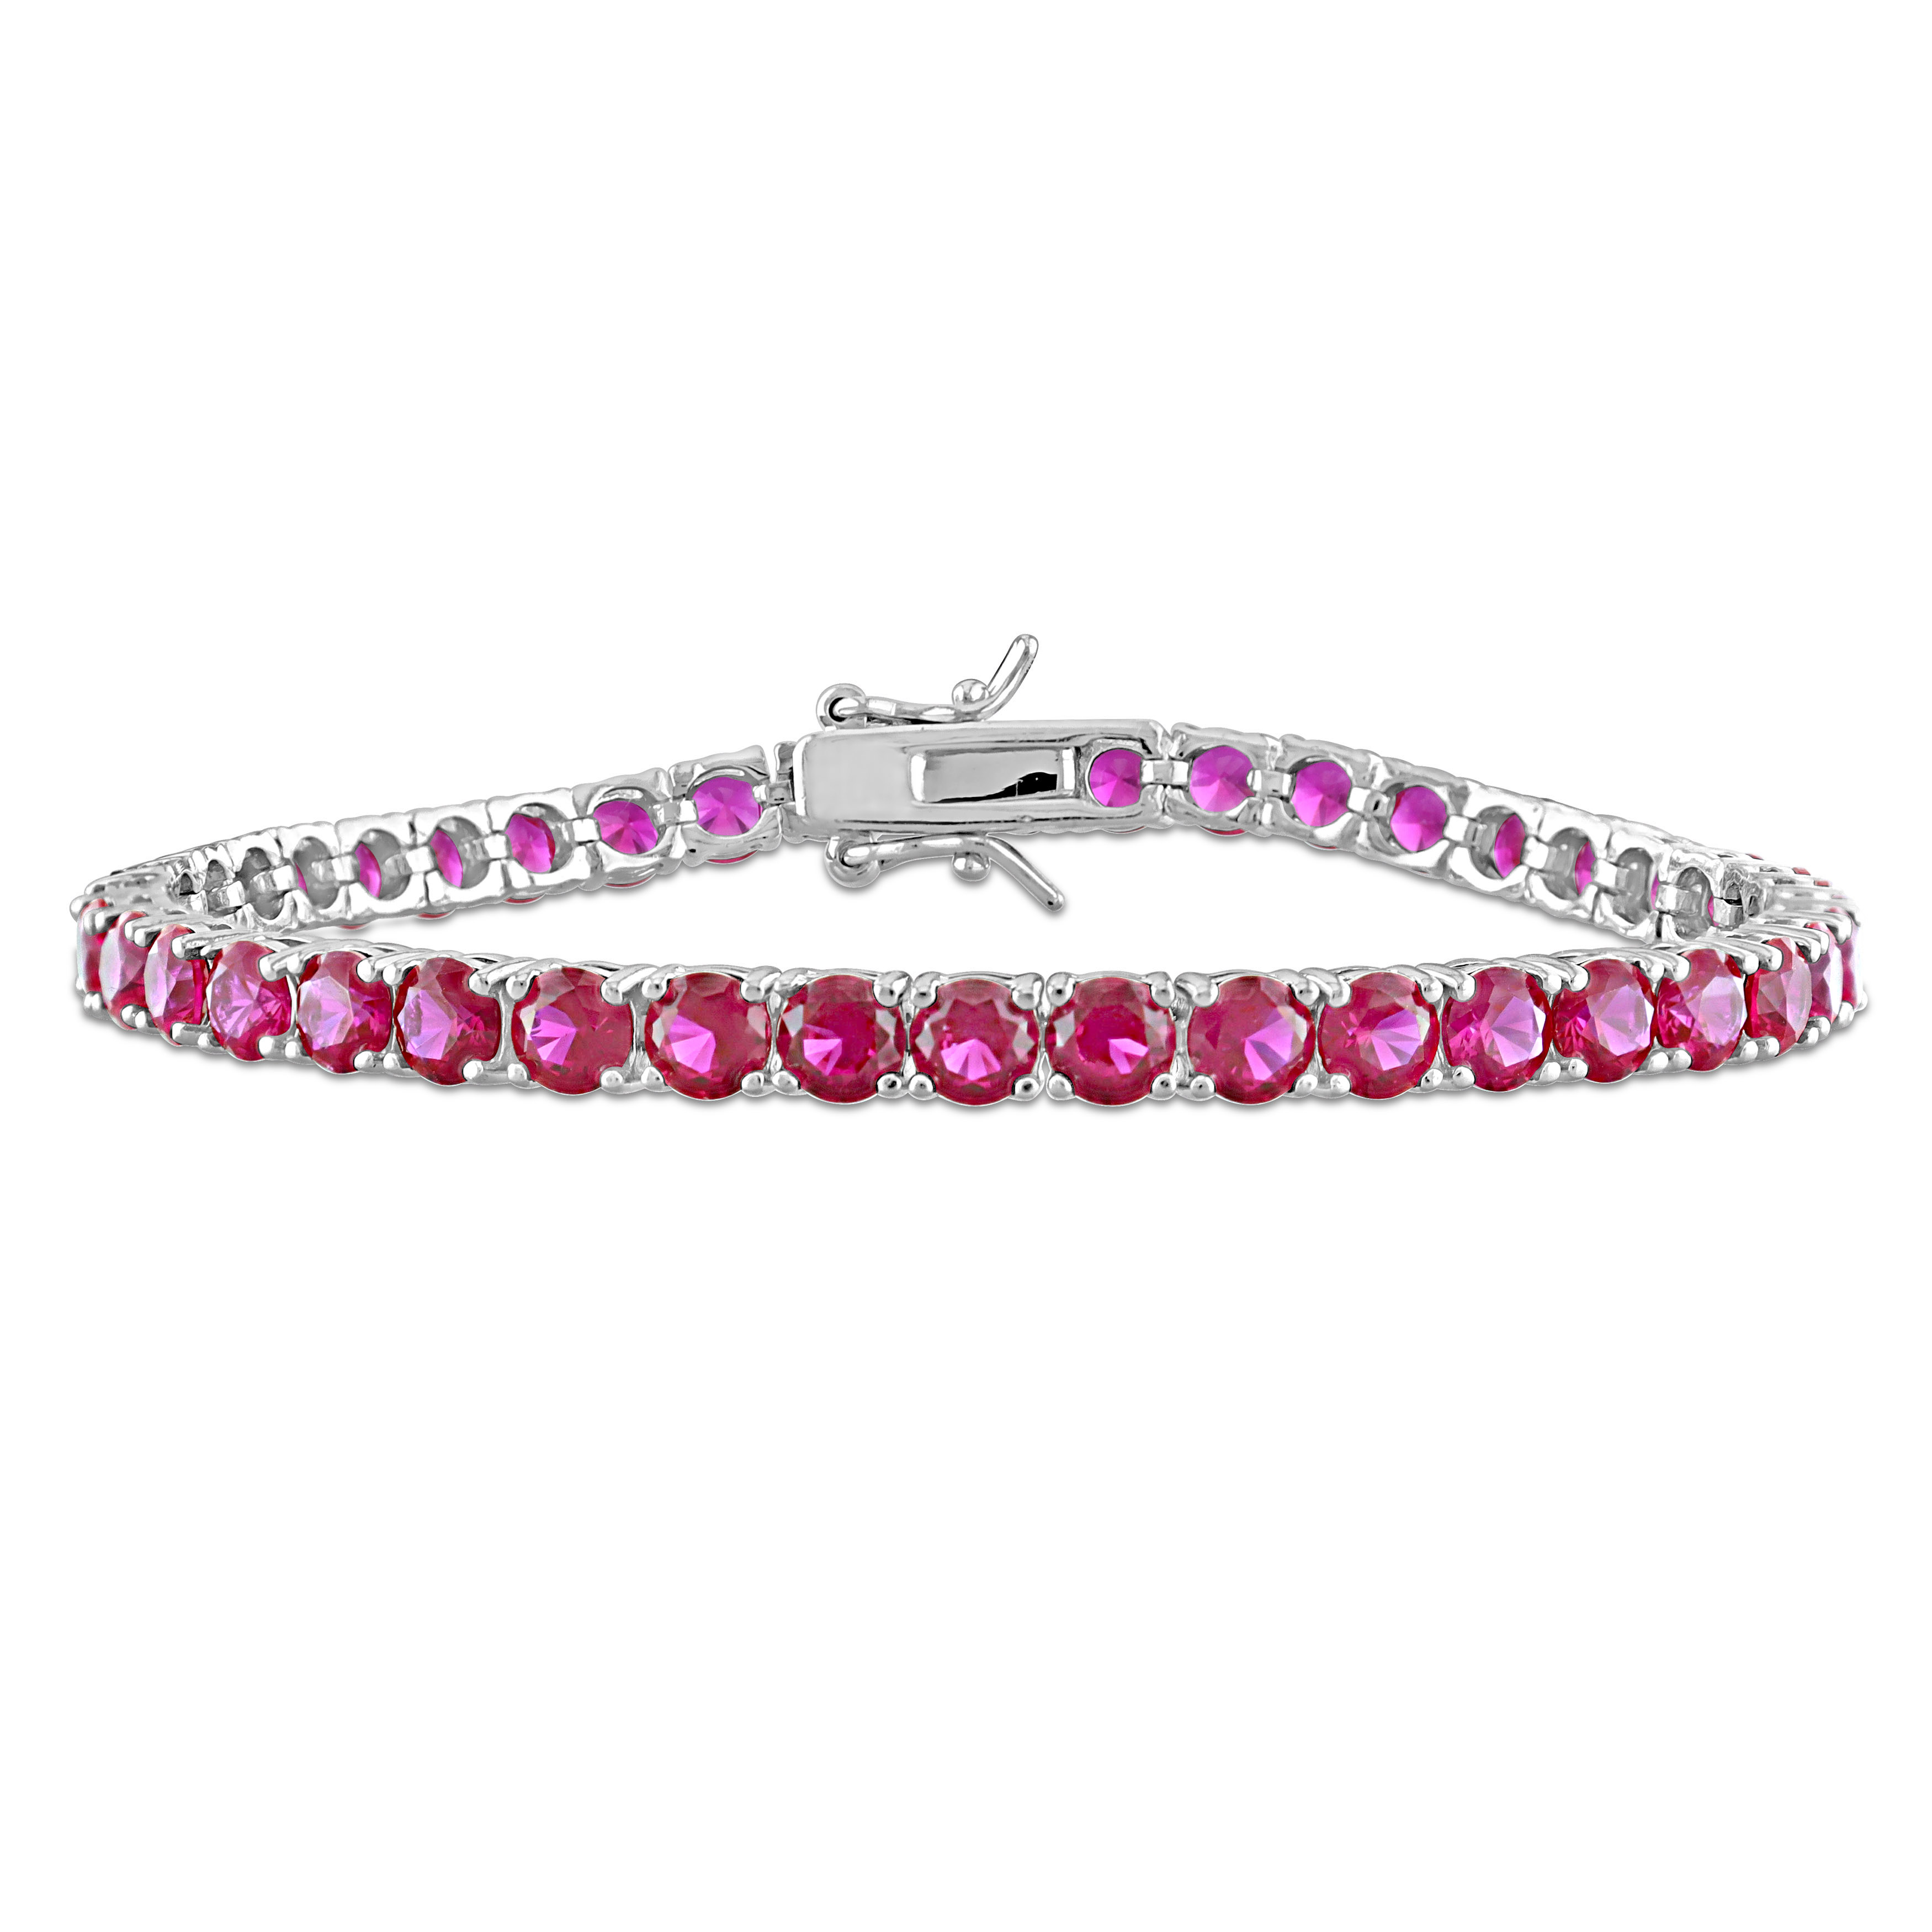 14 1/2 CT TGW Created Ruby Tennis Bracelet with Sterling Silver Safety Clasp - 7.25 in.